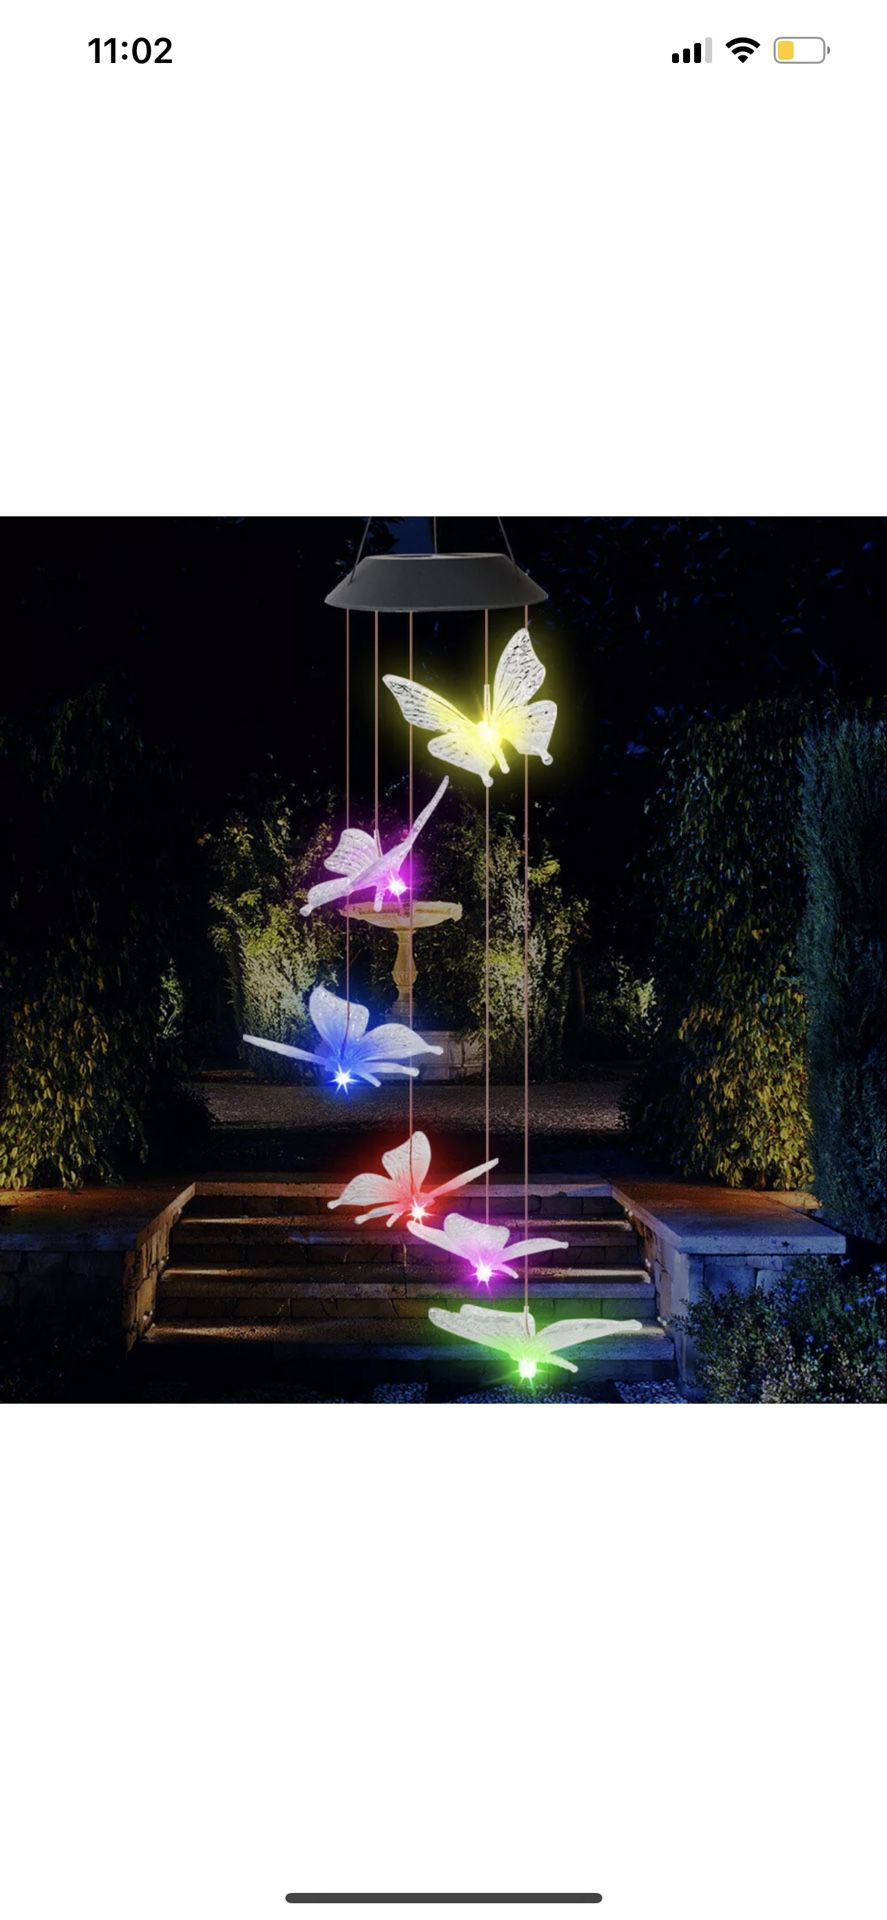 Multi-Color Wind Chime LED Solar Butterfly Night Garden Decor Yard Decorations